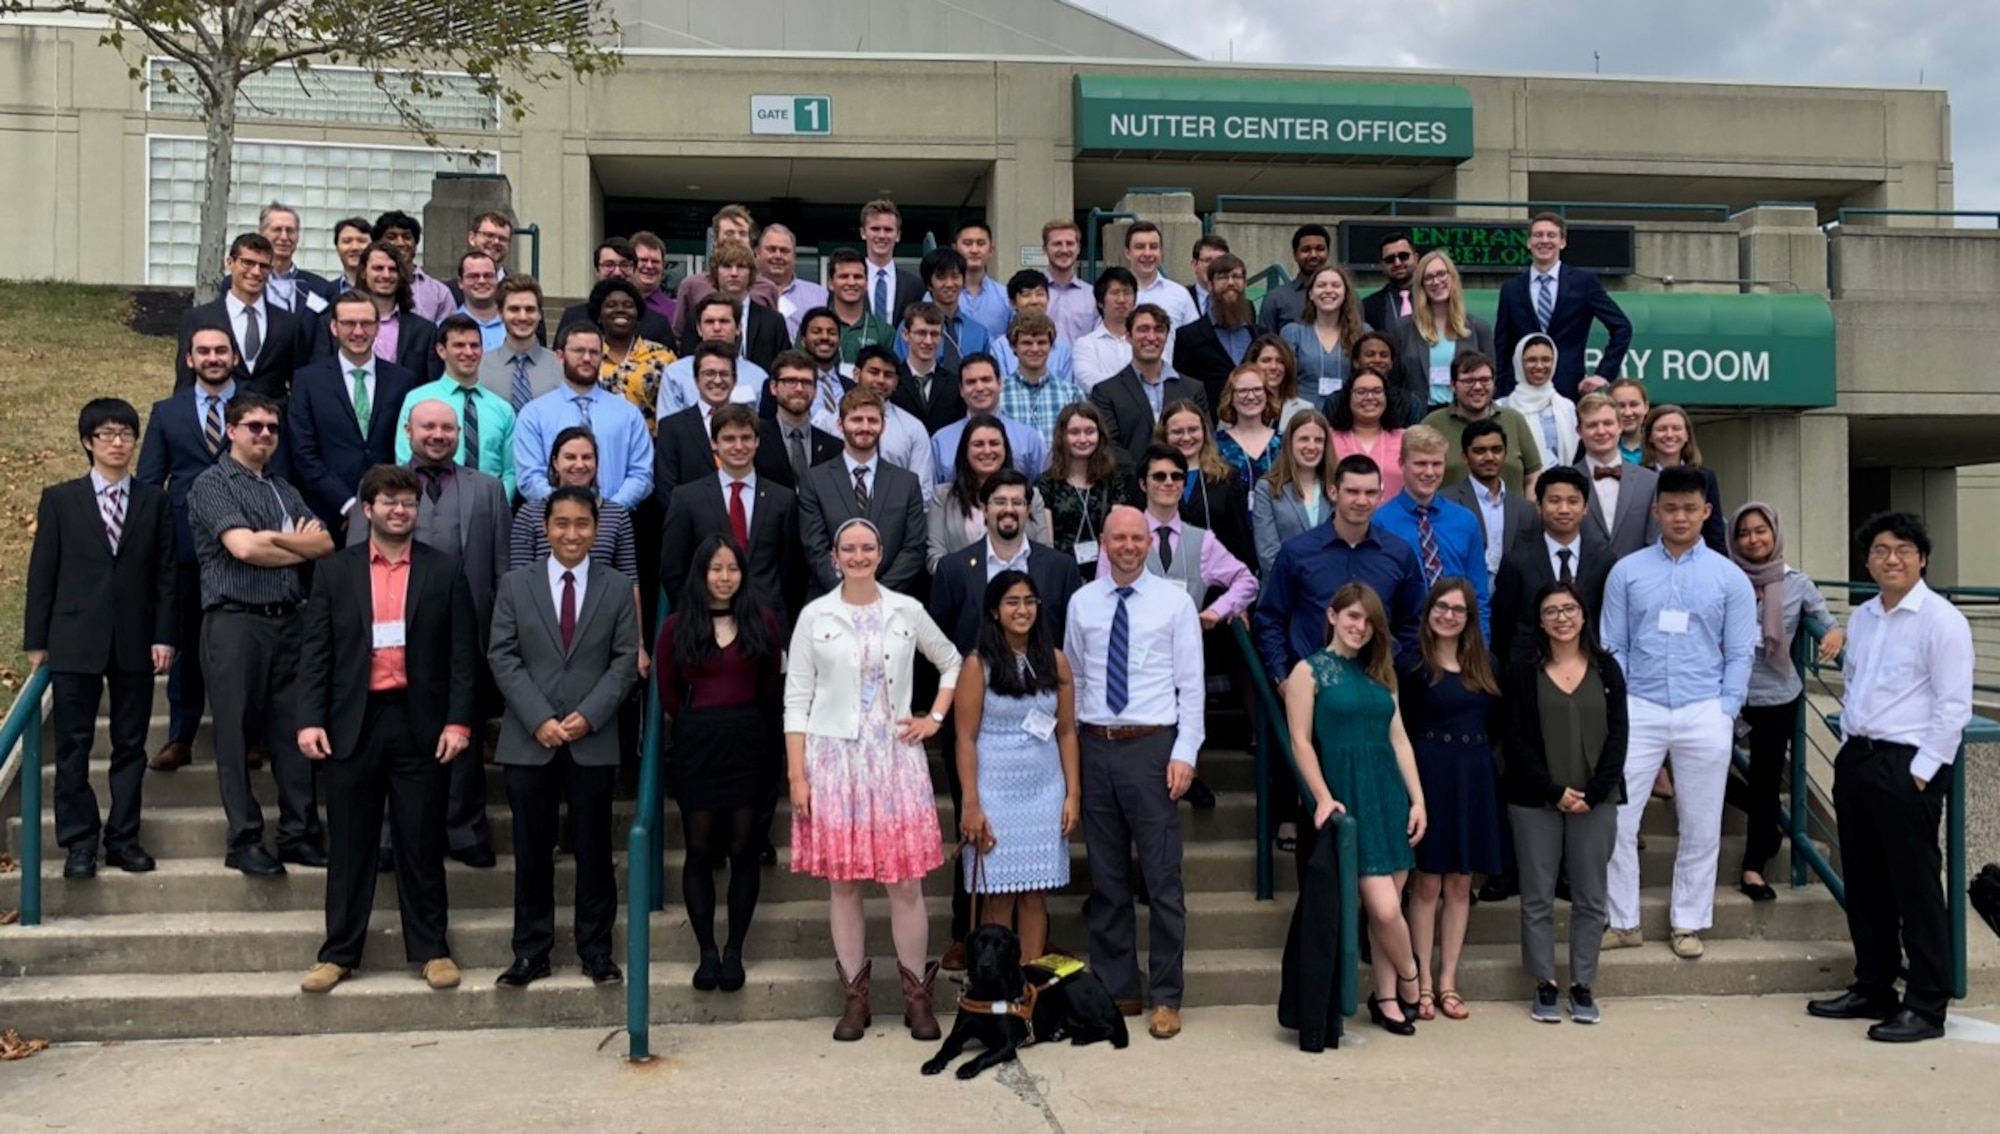 Participants in the 2019 ATRC Summer Internship Program pose for a picture outside the Nutter Center in Dayton, Ohio. (Courtesy photo)